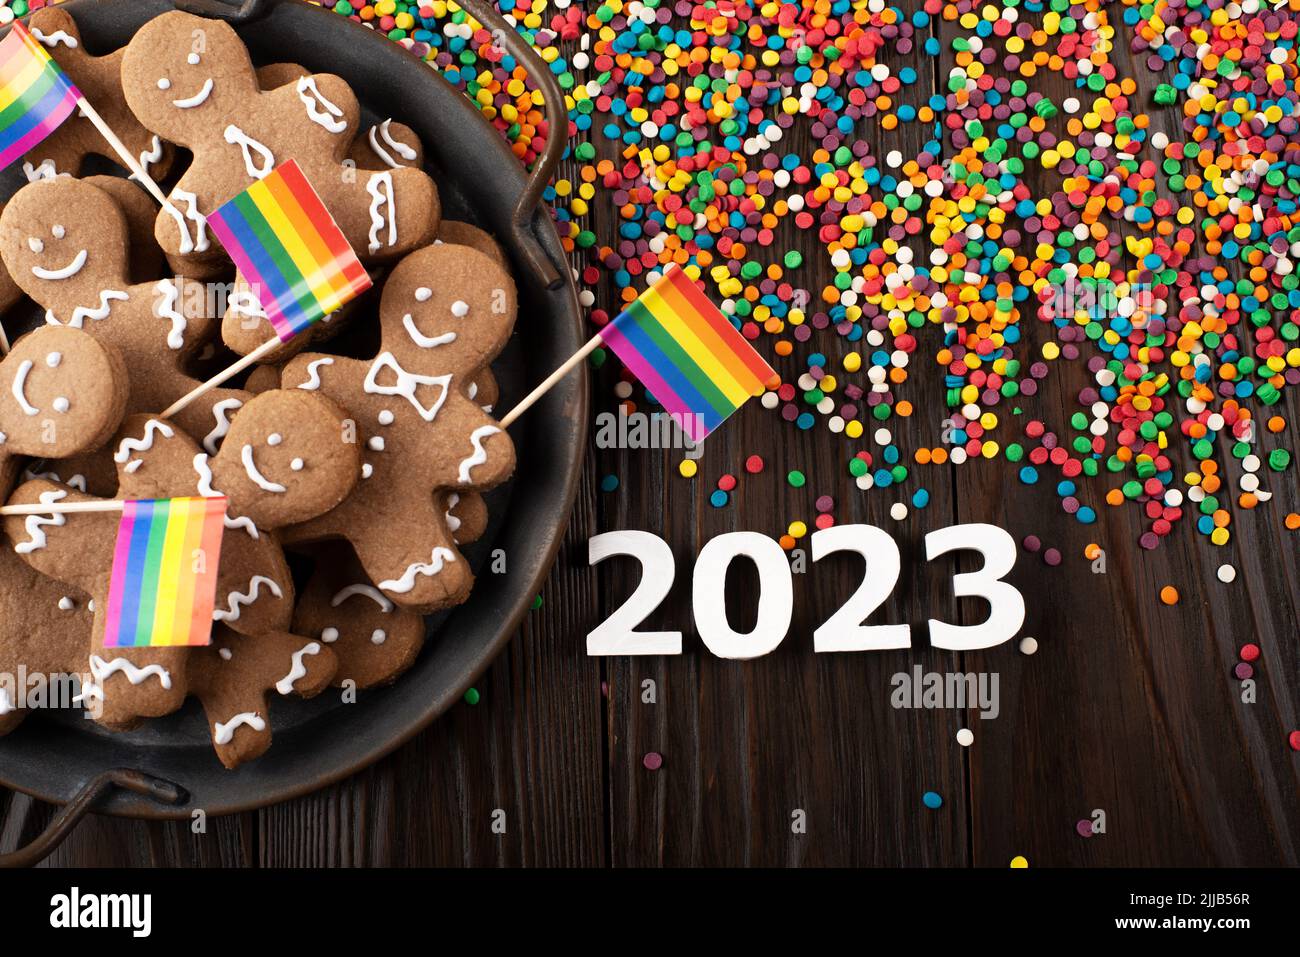 New year background of tray with gingerbread cookie men, rainbow flags and color sprinkles on wooden table Stock Photo